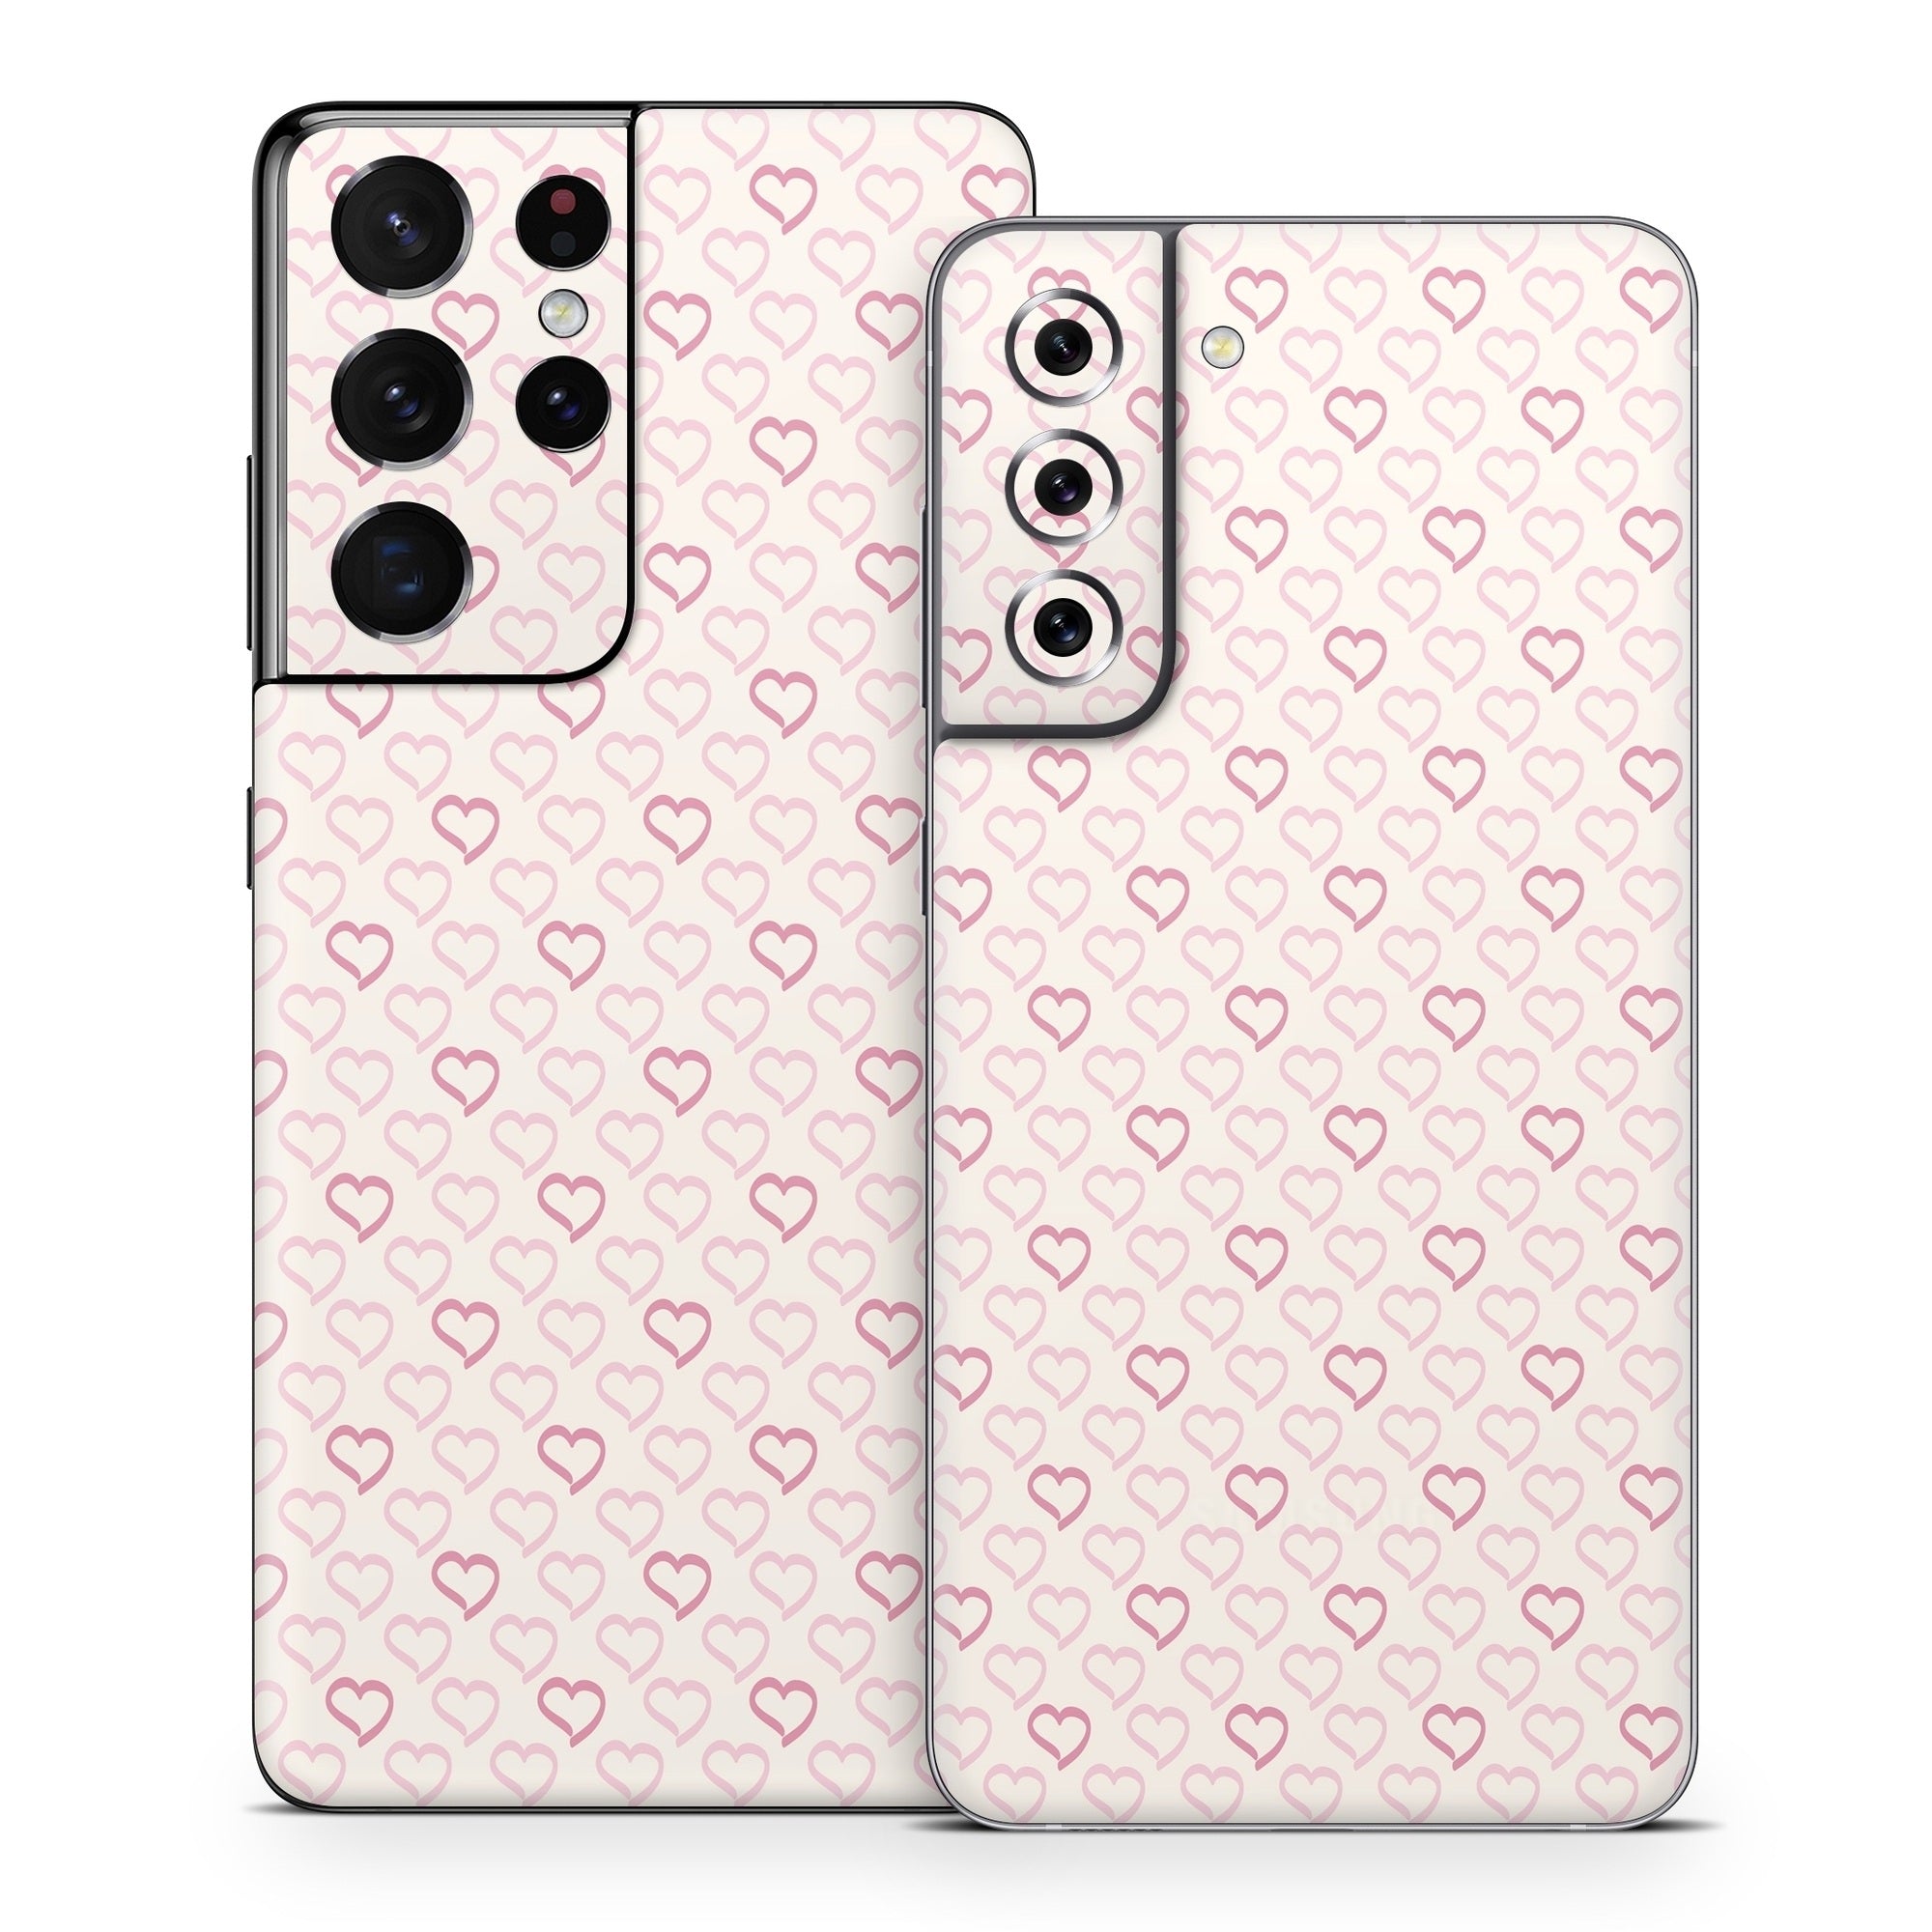 Patterned Hearts - Samsung Galaxy S21 Skin